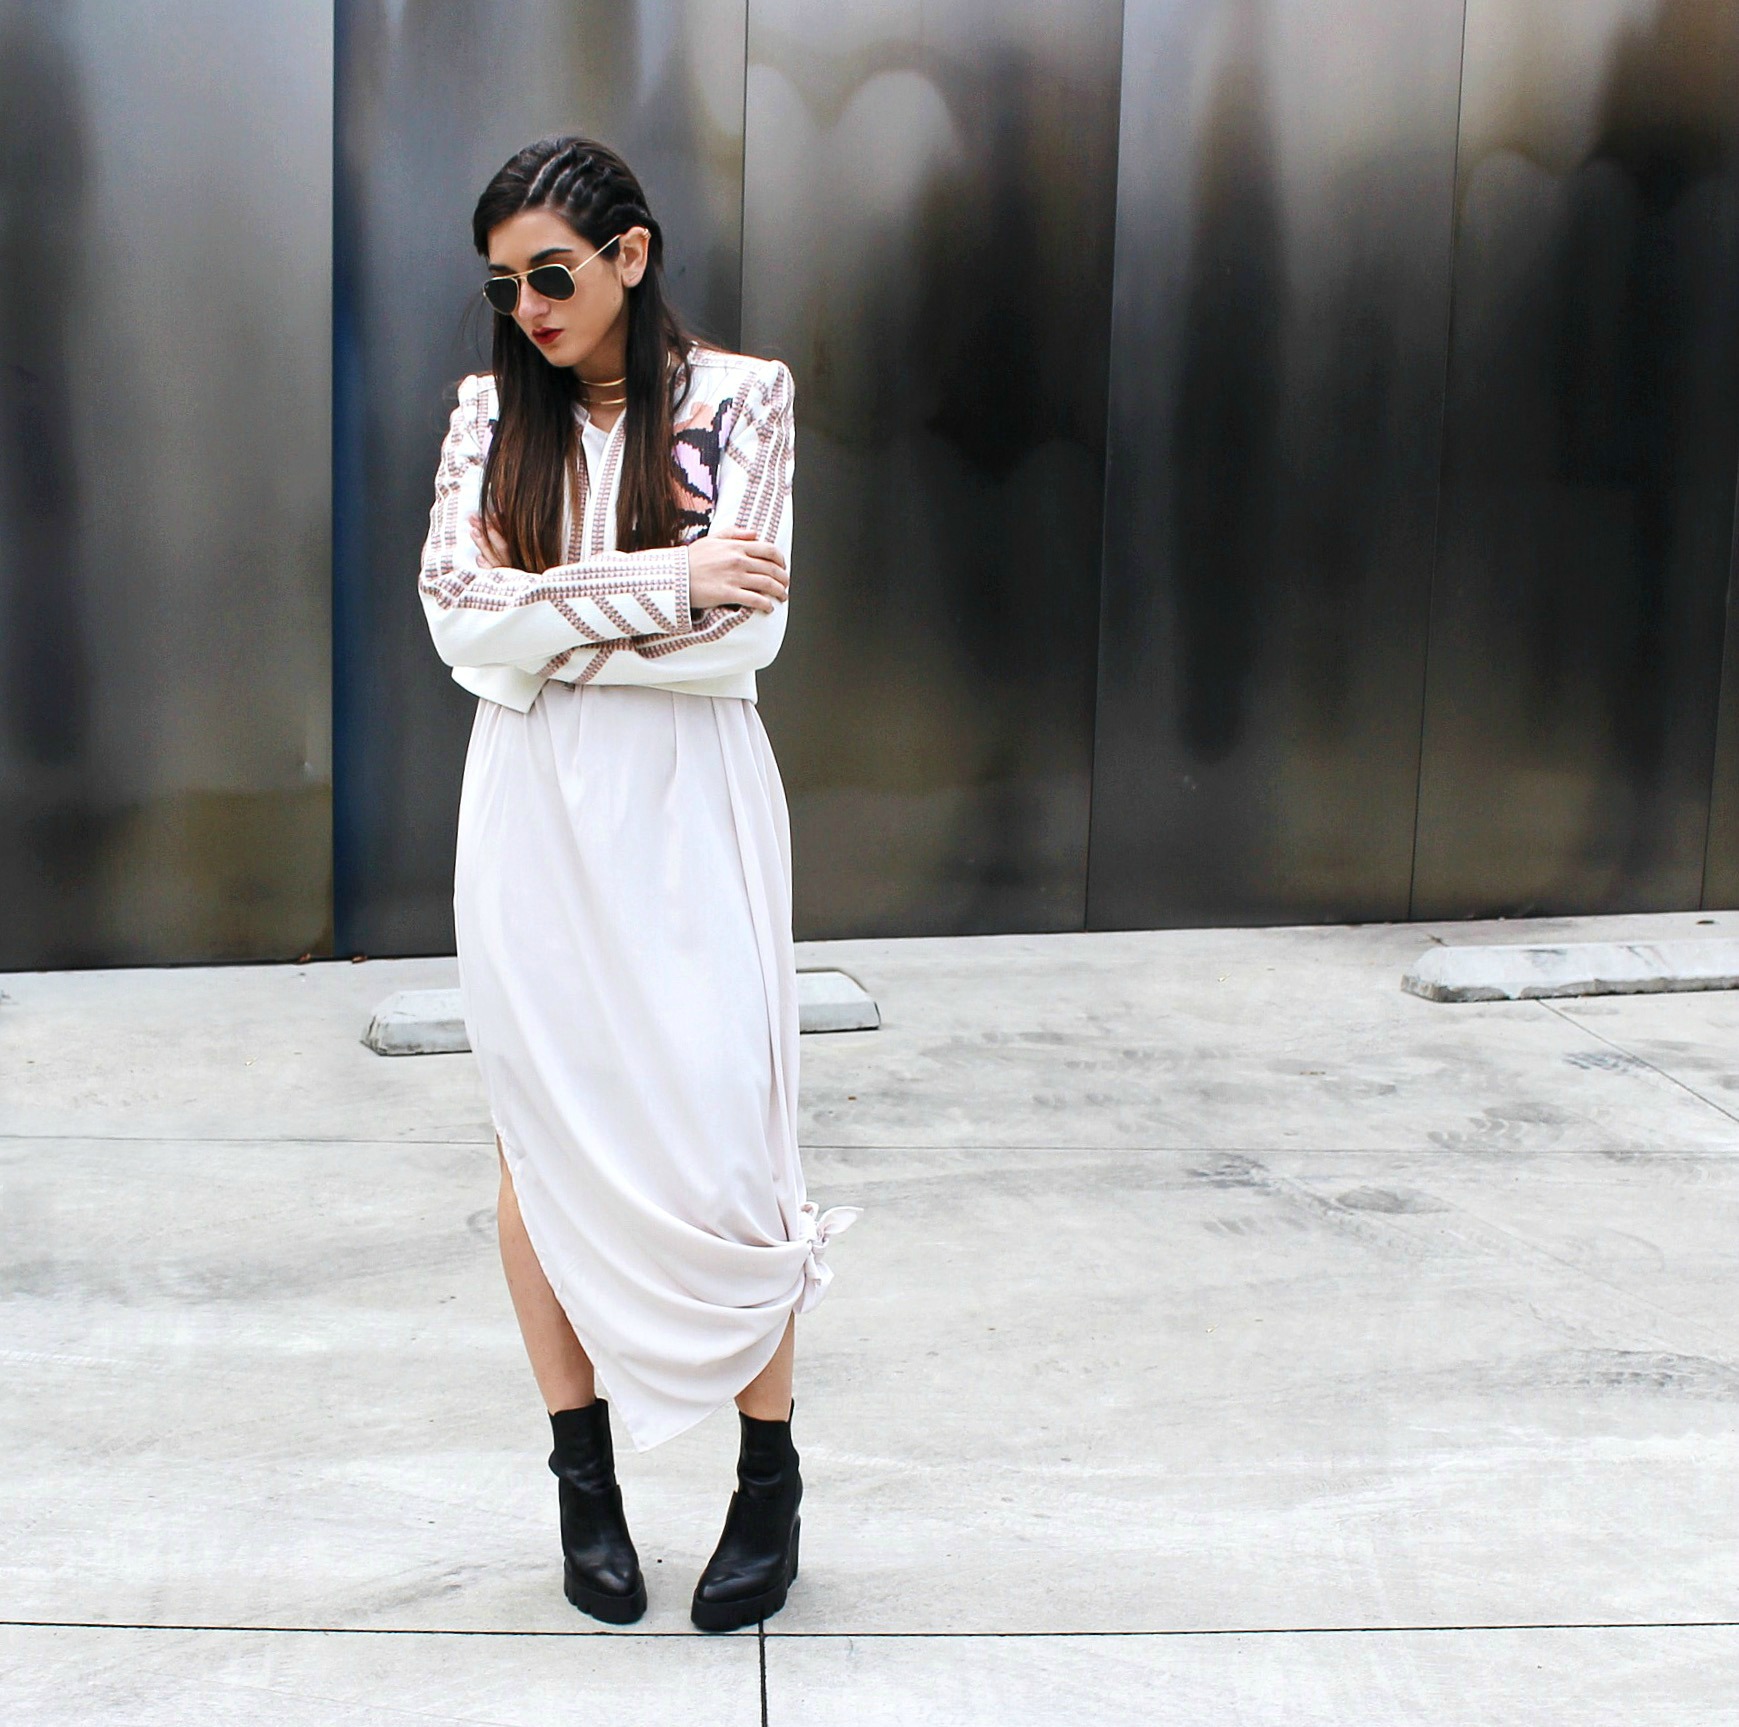 Knotted Maxi Dress Zehava Harel Louboutins & Love Fashion Blog Esther Santer NYC Street Style Blogger Blush Pink Modest Outfit OOTD BCBG Jacket Ash Booties Gold Collar Necklace RayBan Aviator Sunglasses Cornrows Designer Inspo Accessories Model Women.jpg